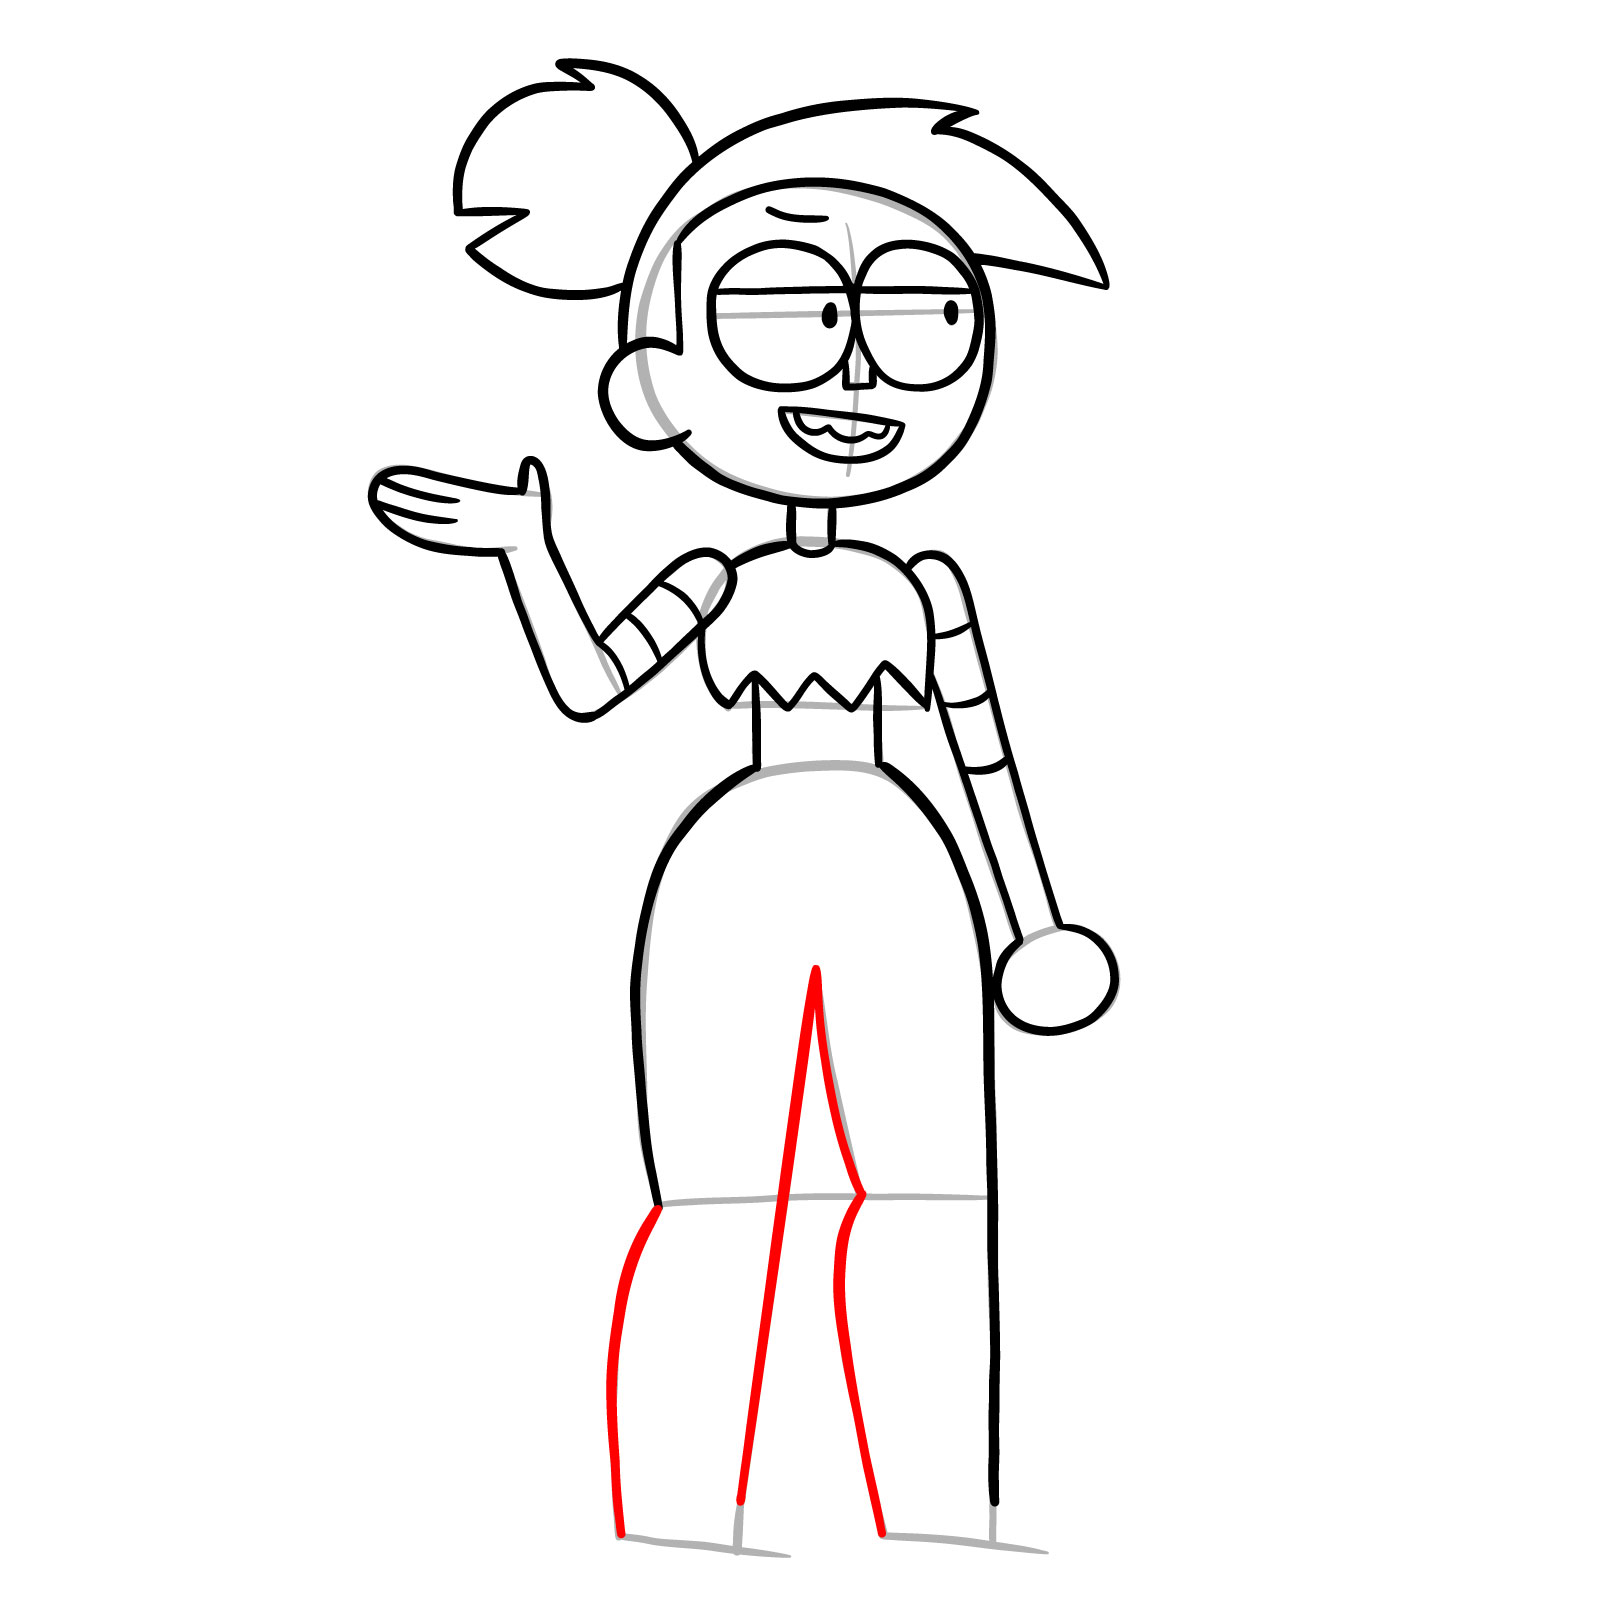 How to draw Enid Mettle from OK K.O.! - step 21